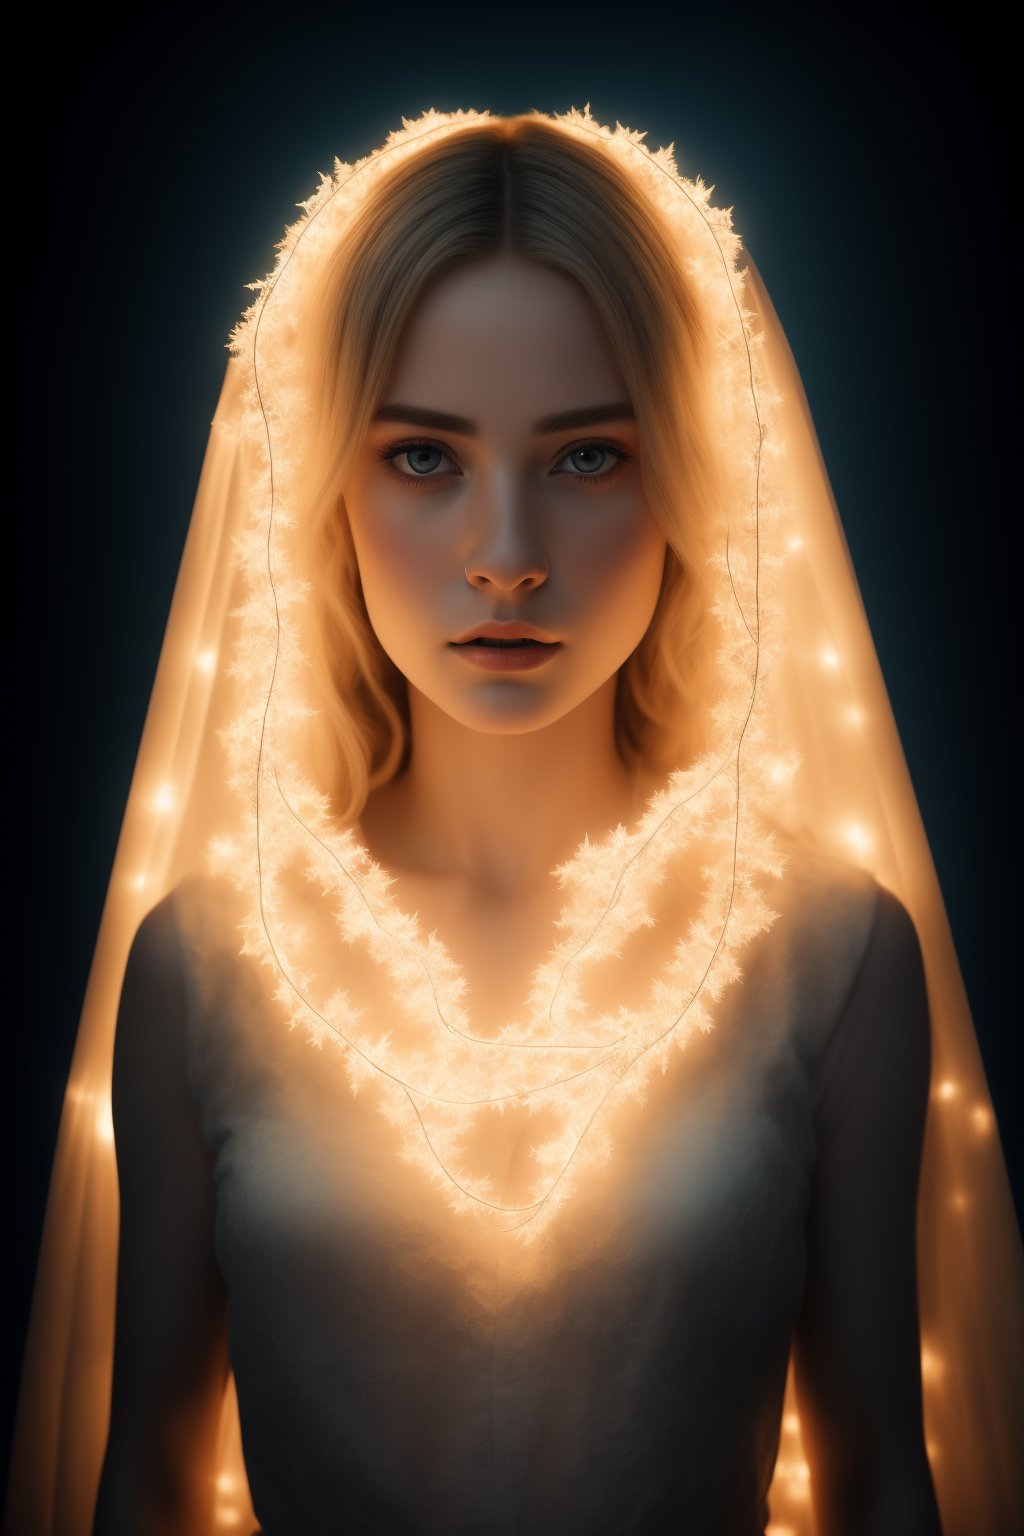 (best quality, 8K, highres, masterpiece),  ultra-detailed,  (photo-realistic,  lifelike) portrayal of a semi-ghost female with ethereal beauty. Her arms are a mesmerizing spectacle,  composed of intricate bioluminescent patterns that radiate a soft,  (otherworldly,  celestial) glow. The cinematic rendering captures every nuance of her spectral presence,  making this image a true high-resolution masterpiece that blends the lines between the living and the supernatural.